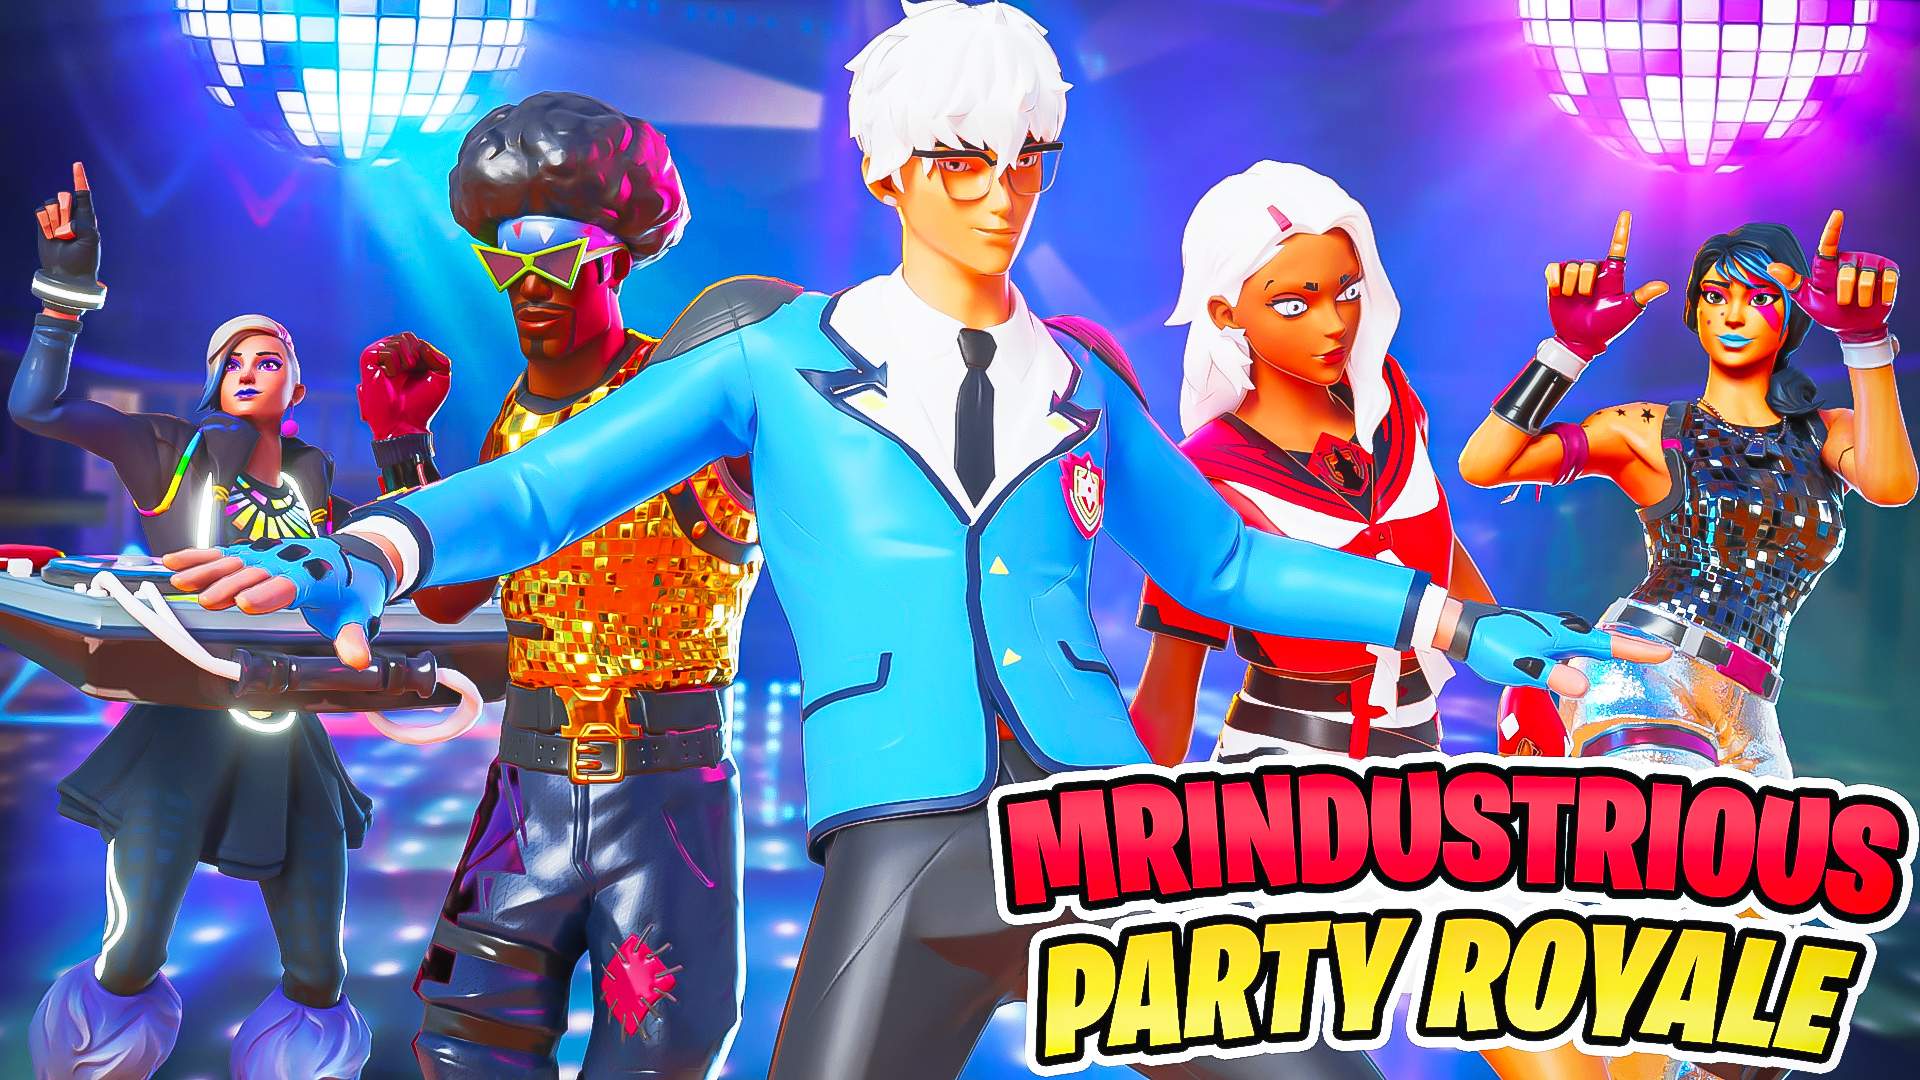 MRINDUSTRIOUS PARTYROYALE